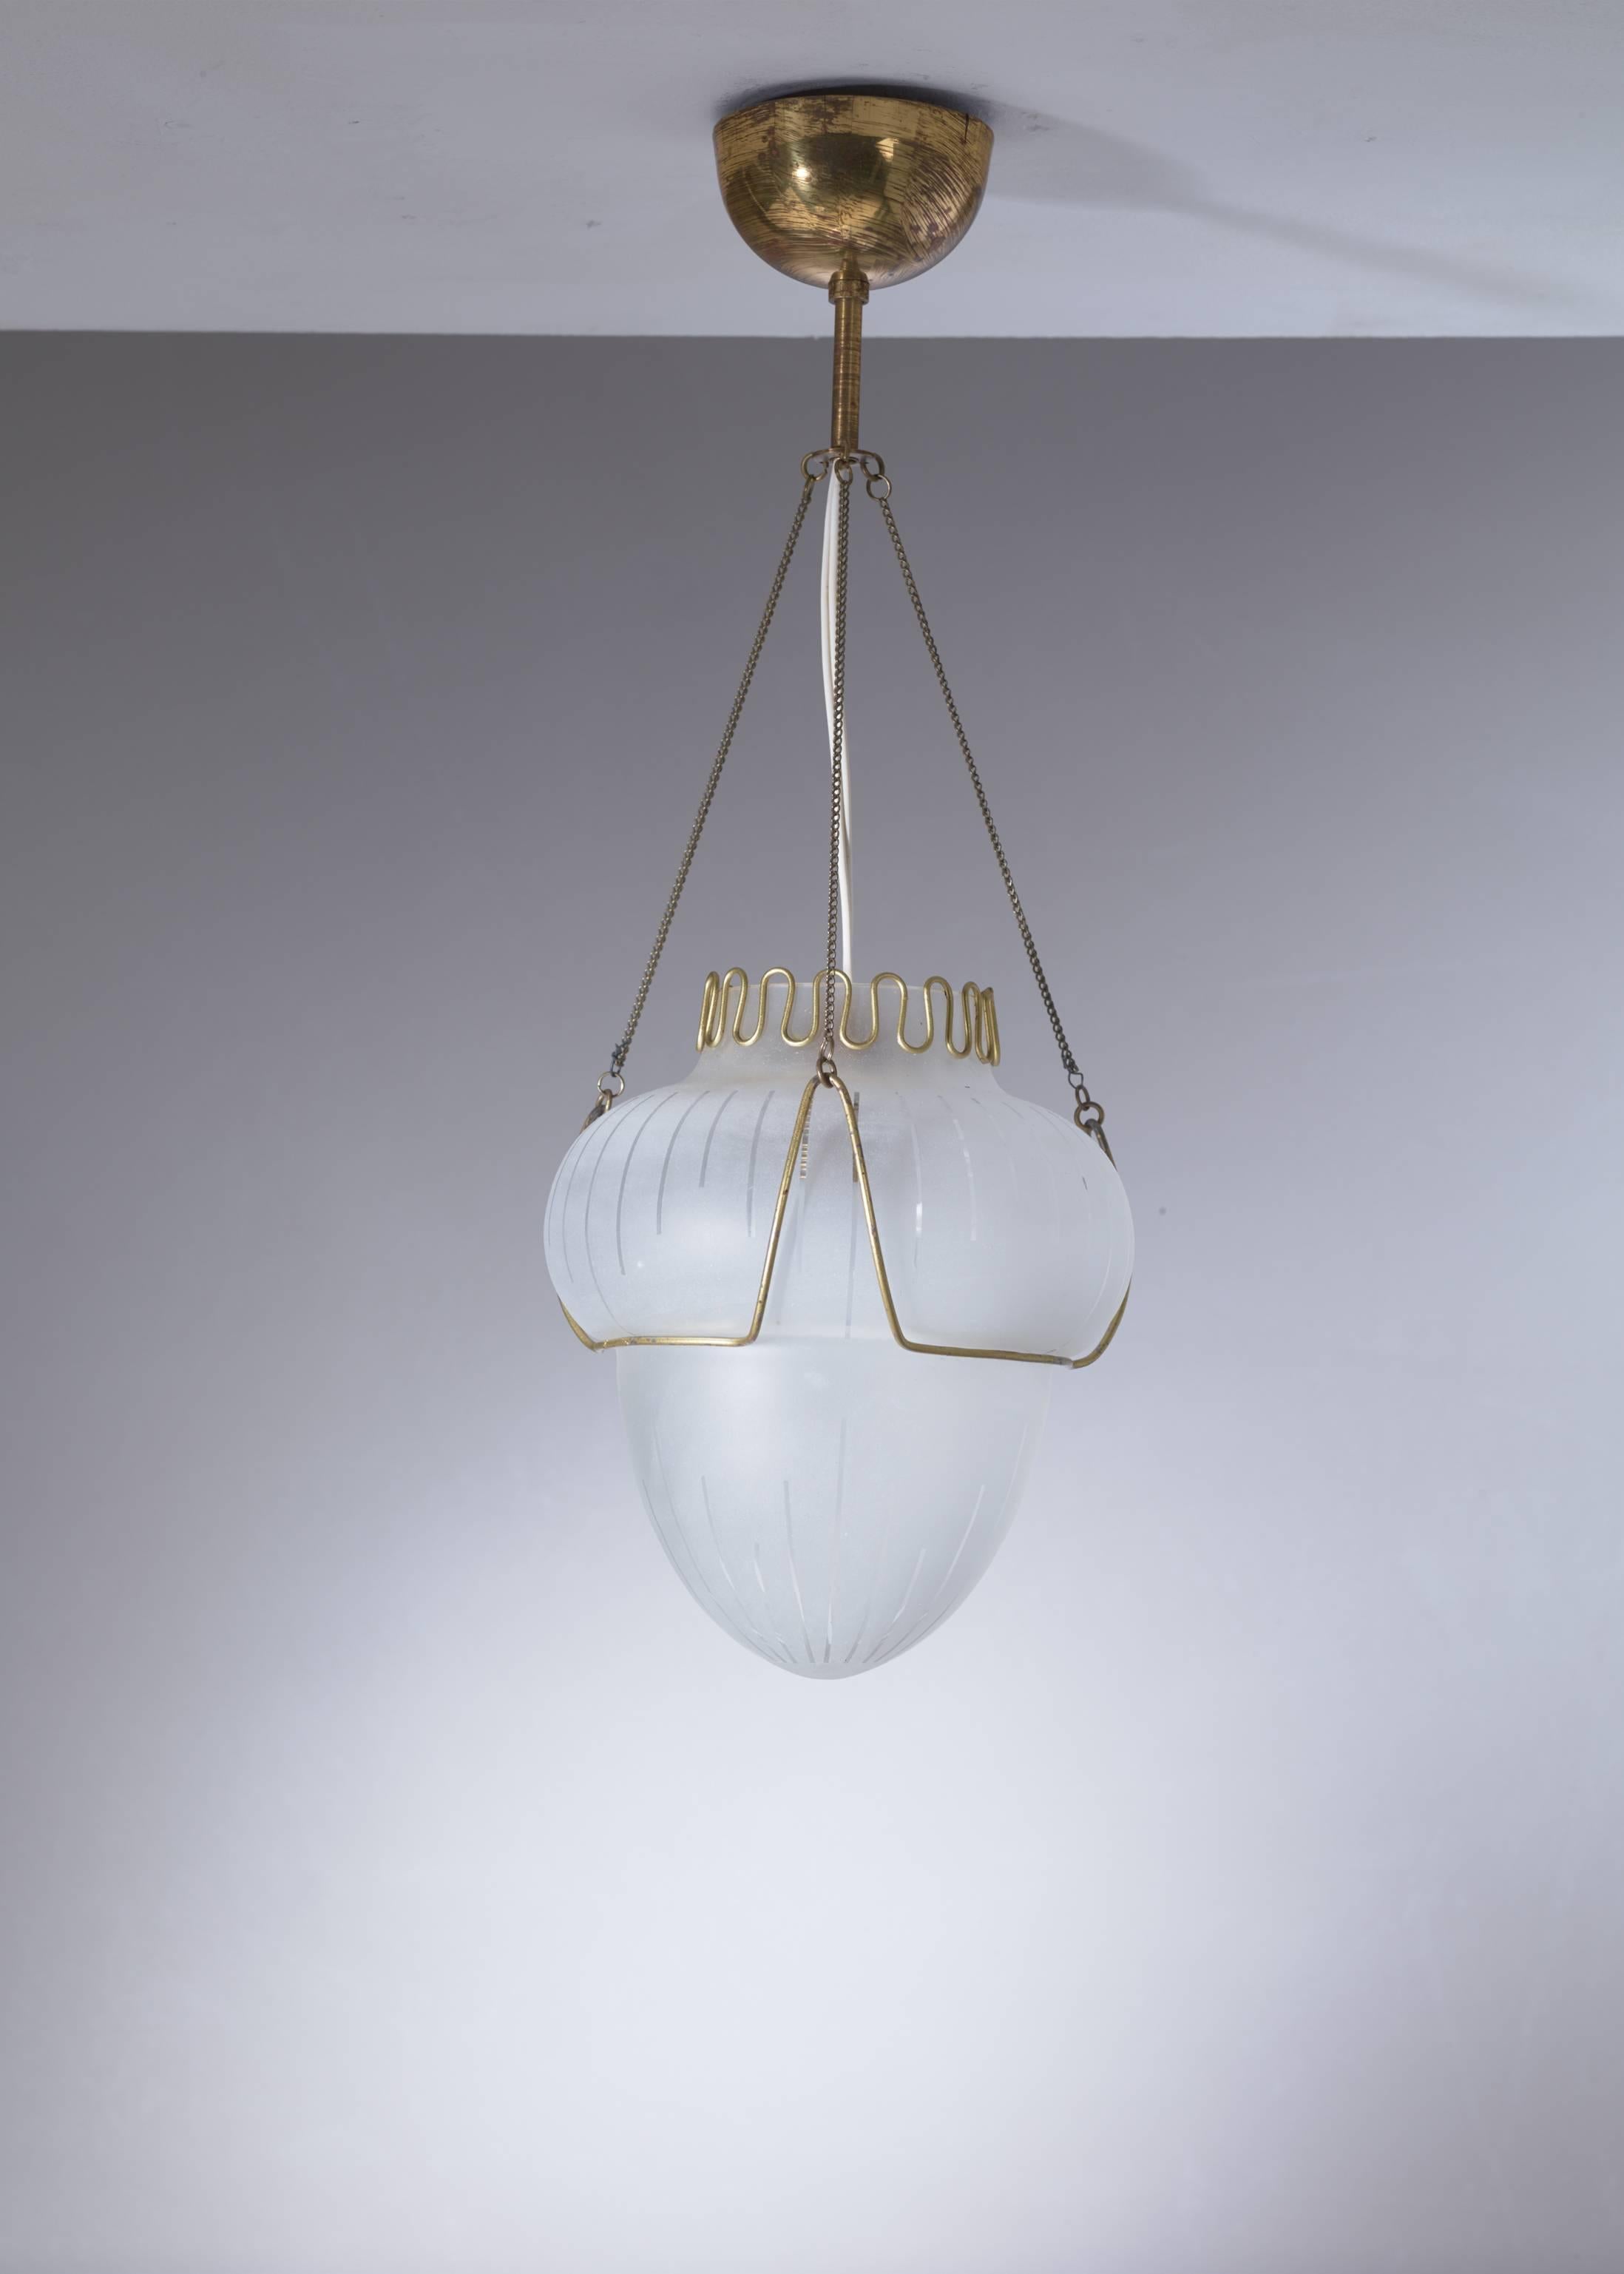 Scandinavian Modern Frosted Glass and Brass Pendant, Sweden, 1940s For Sale